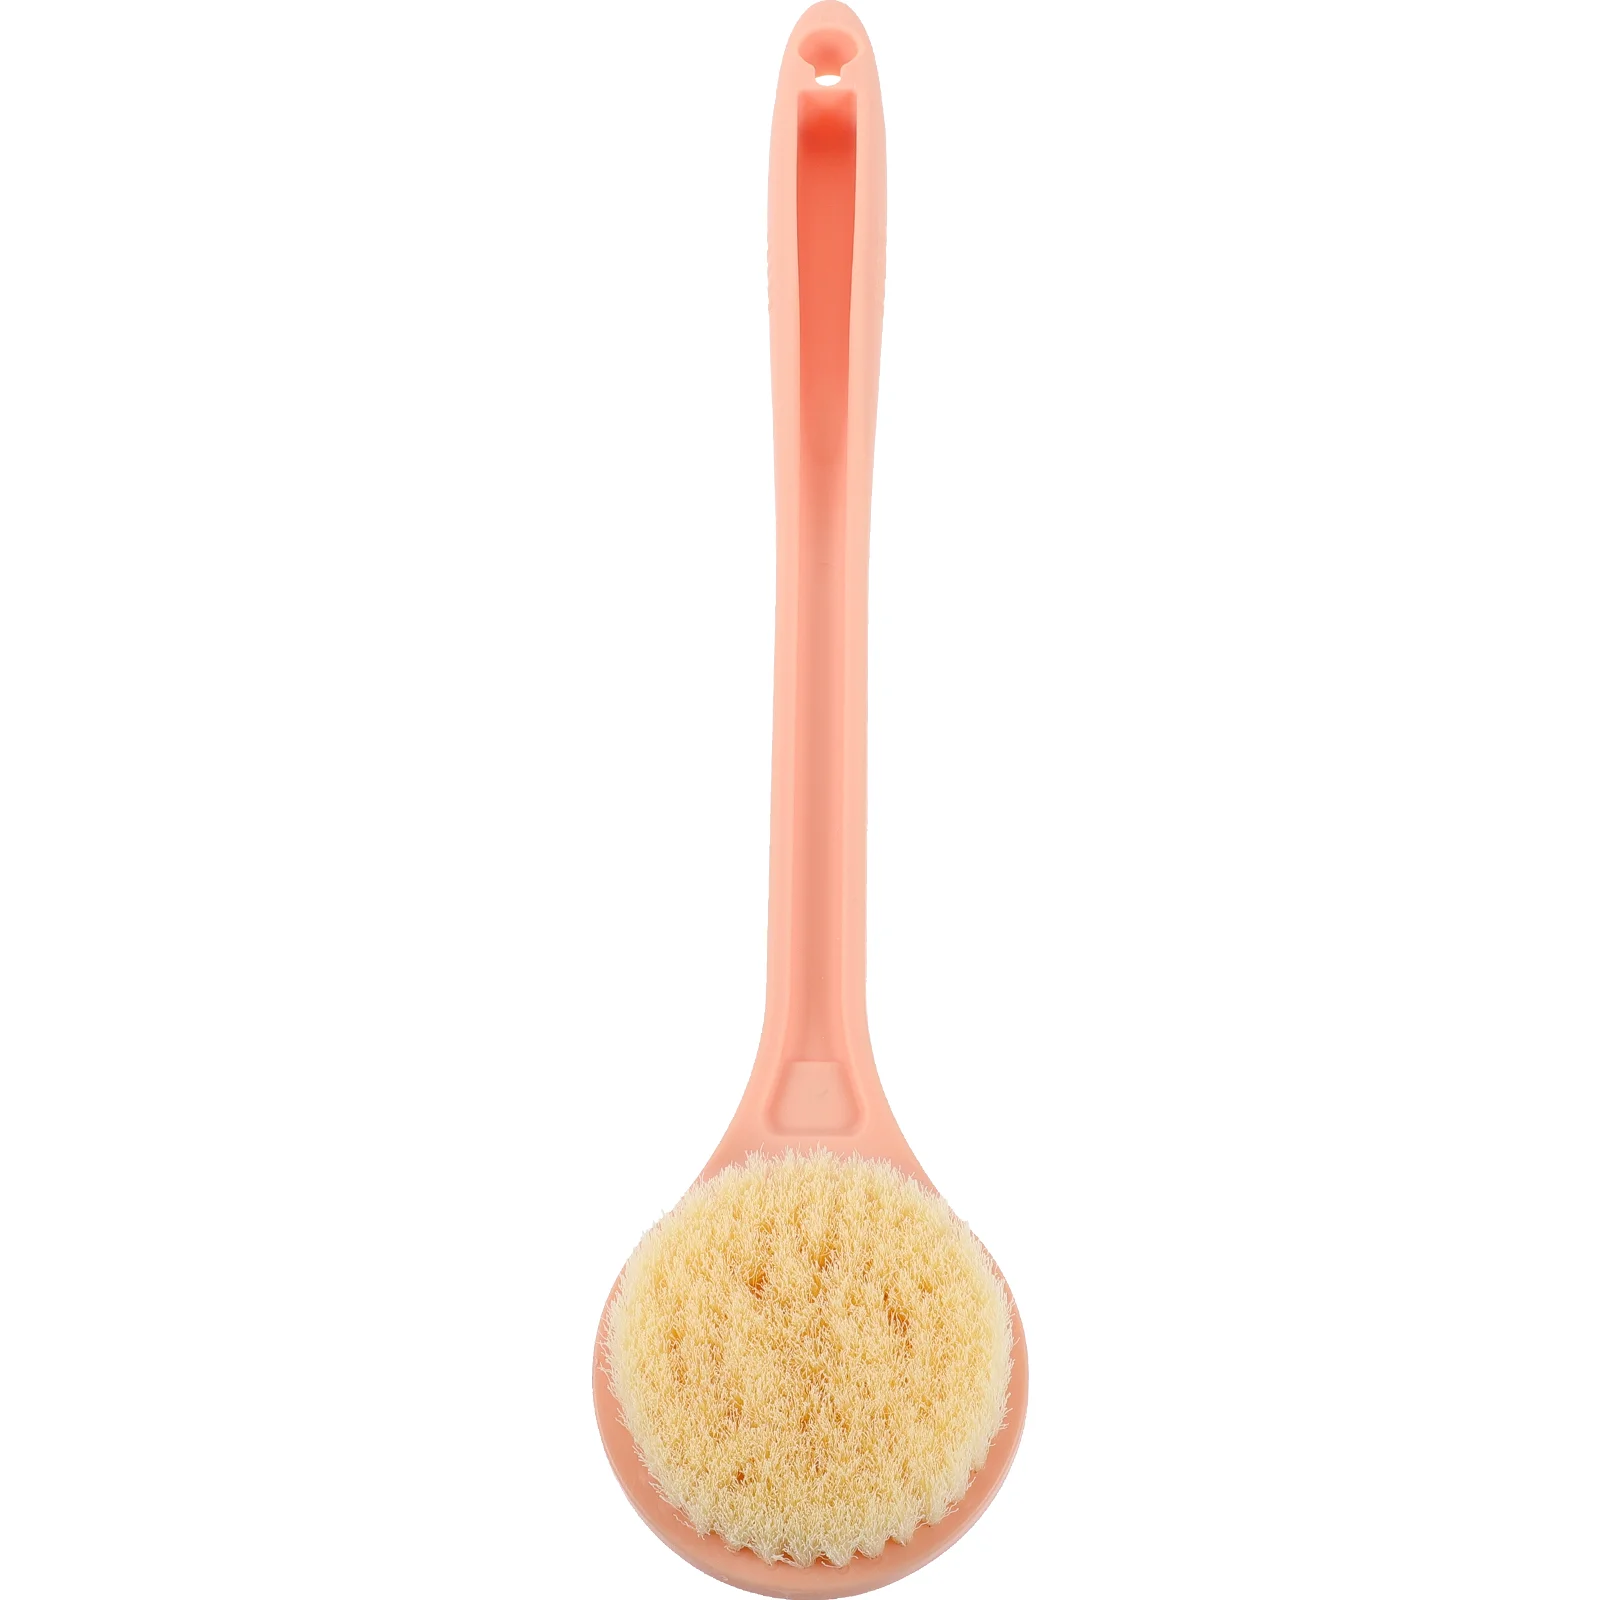 Bath Brush Exfoliating Back Scrubber Scrubbers for Use Shower Body with Handle The Dry Mens silicone bath body brush shower massager exfoliating back scrubber for shower back scratcher body skin scrubber deep clean